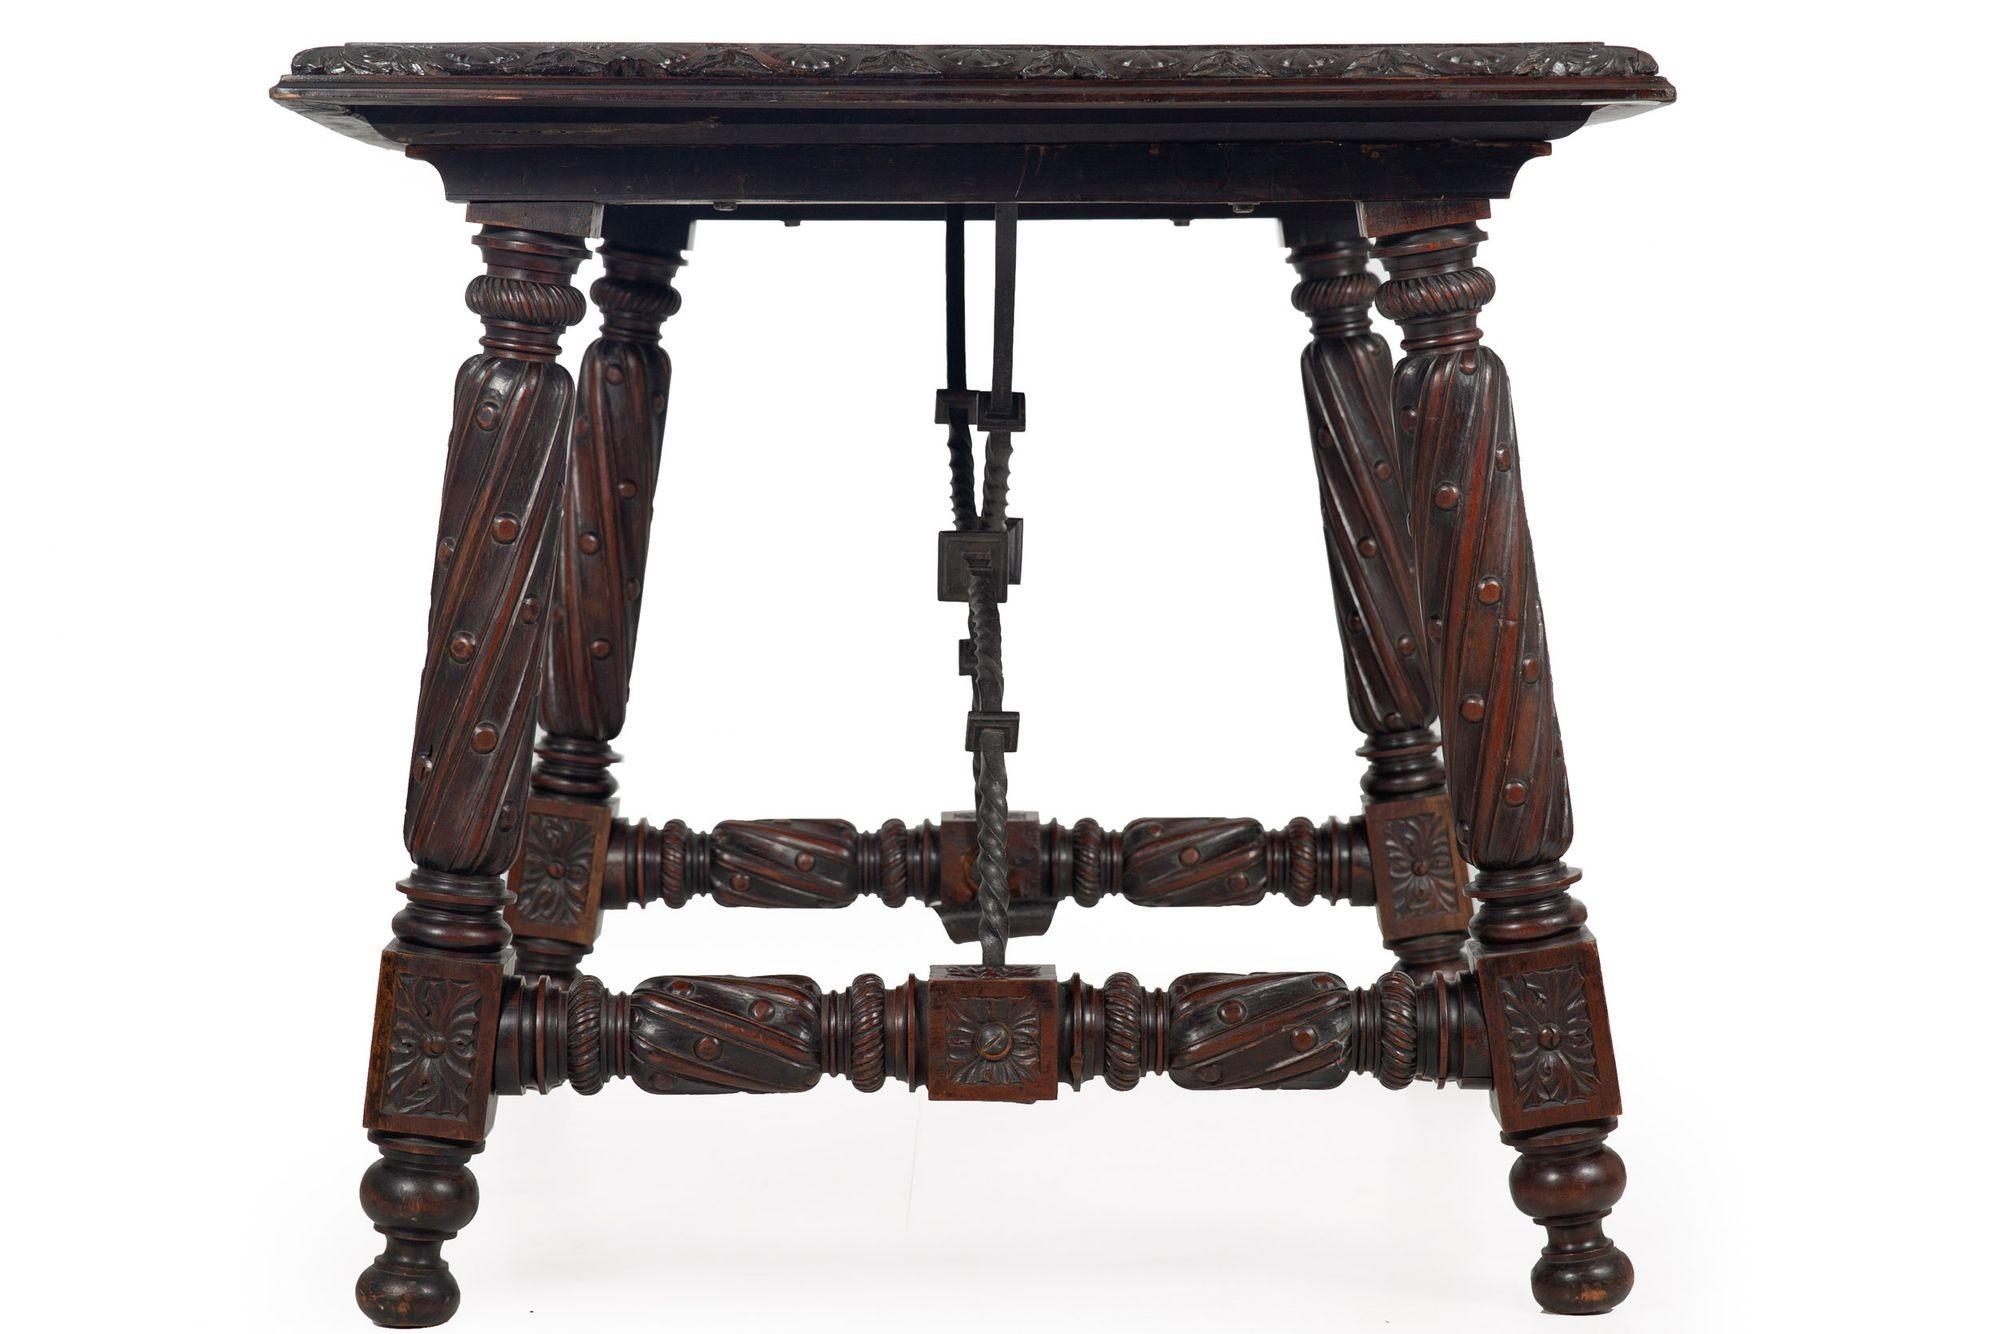 Circa 1900 Gothic Revival Antique Carved Walnut Library Table In Good Condition For Sale In Shippensburg, PA